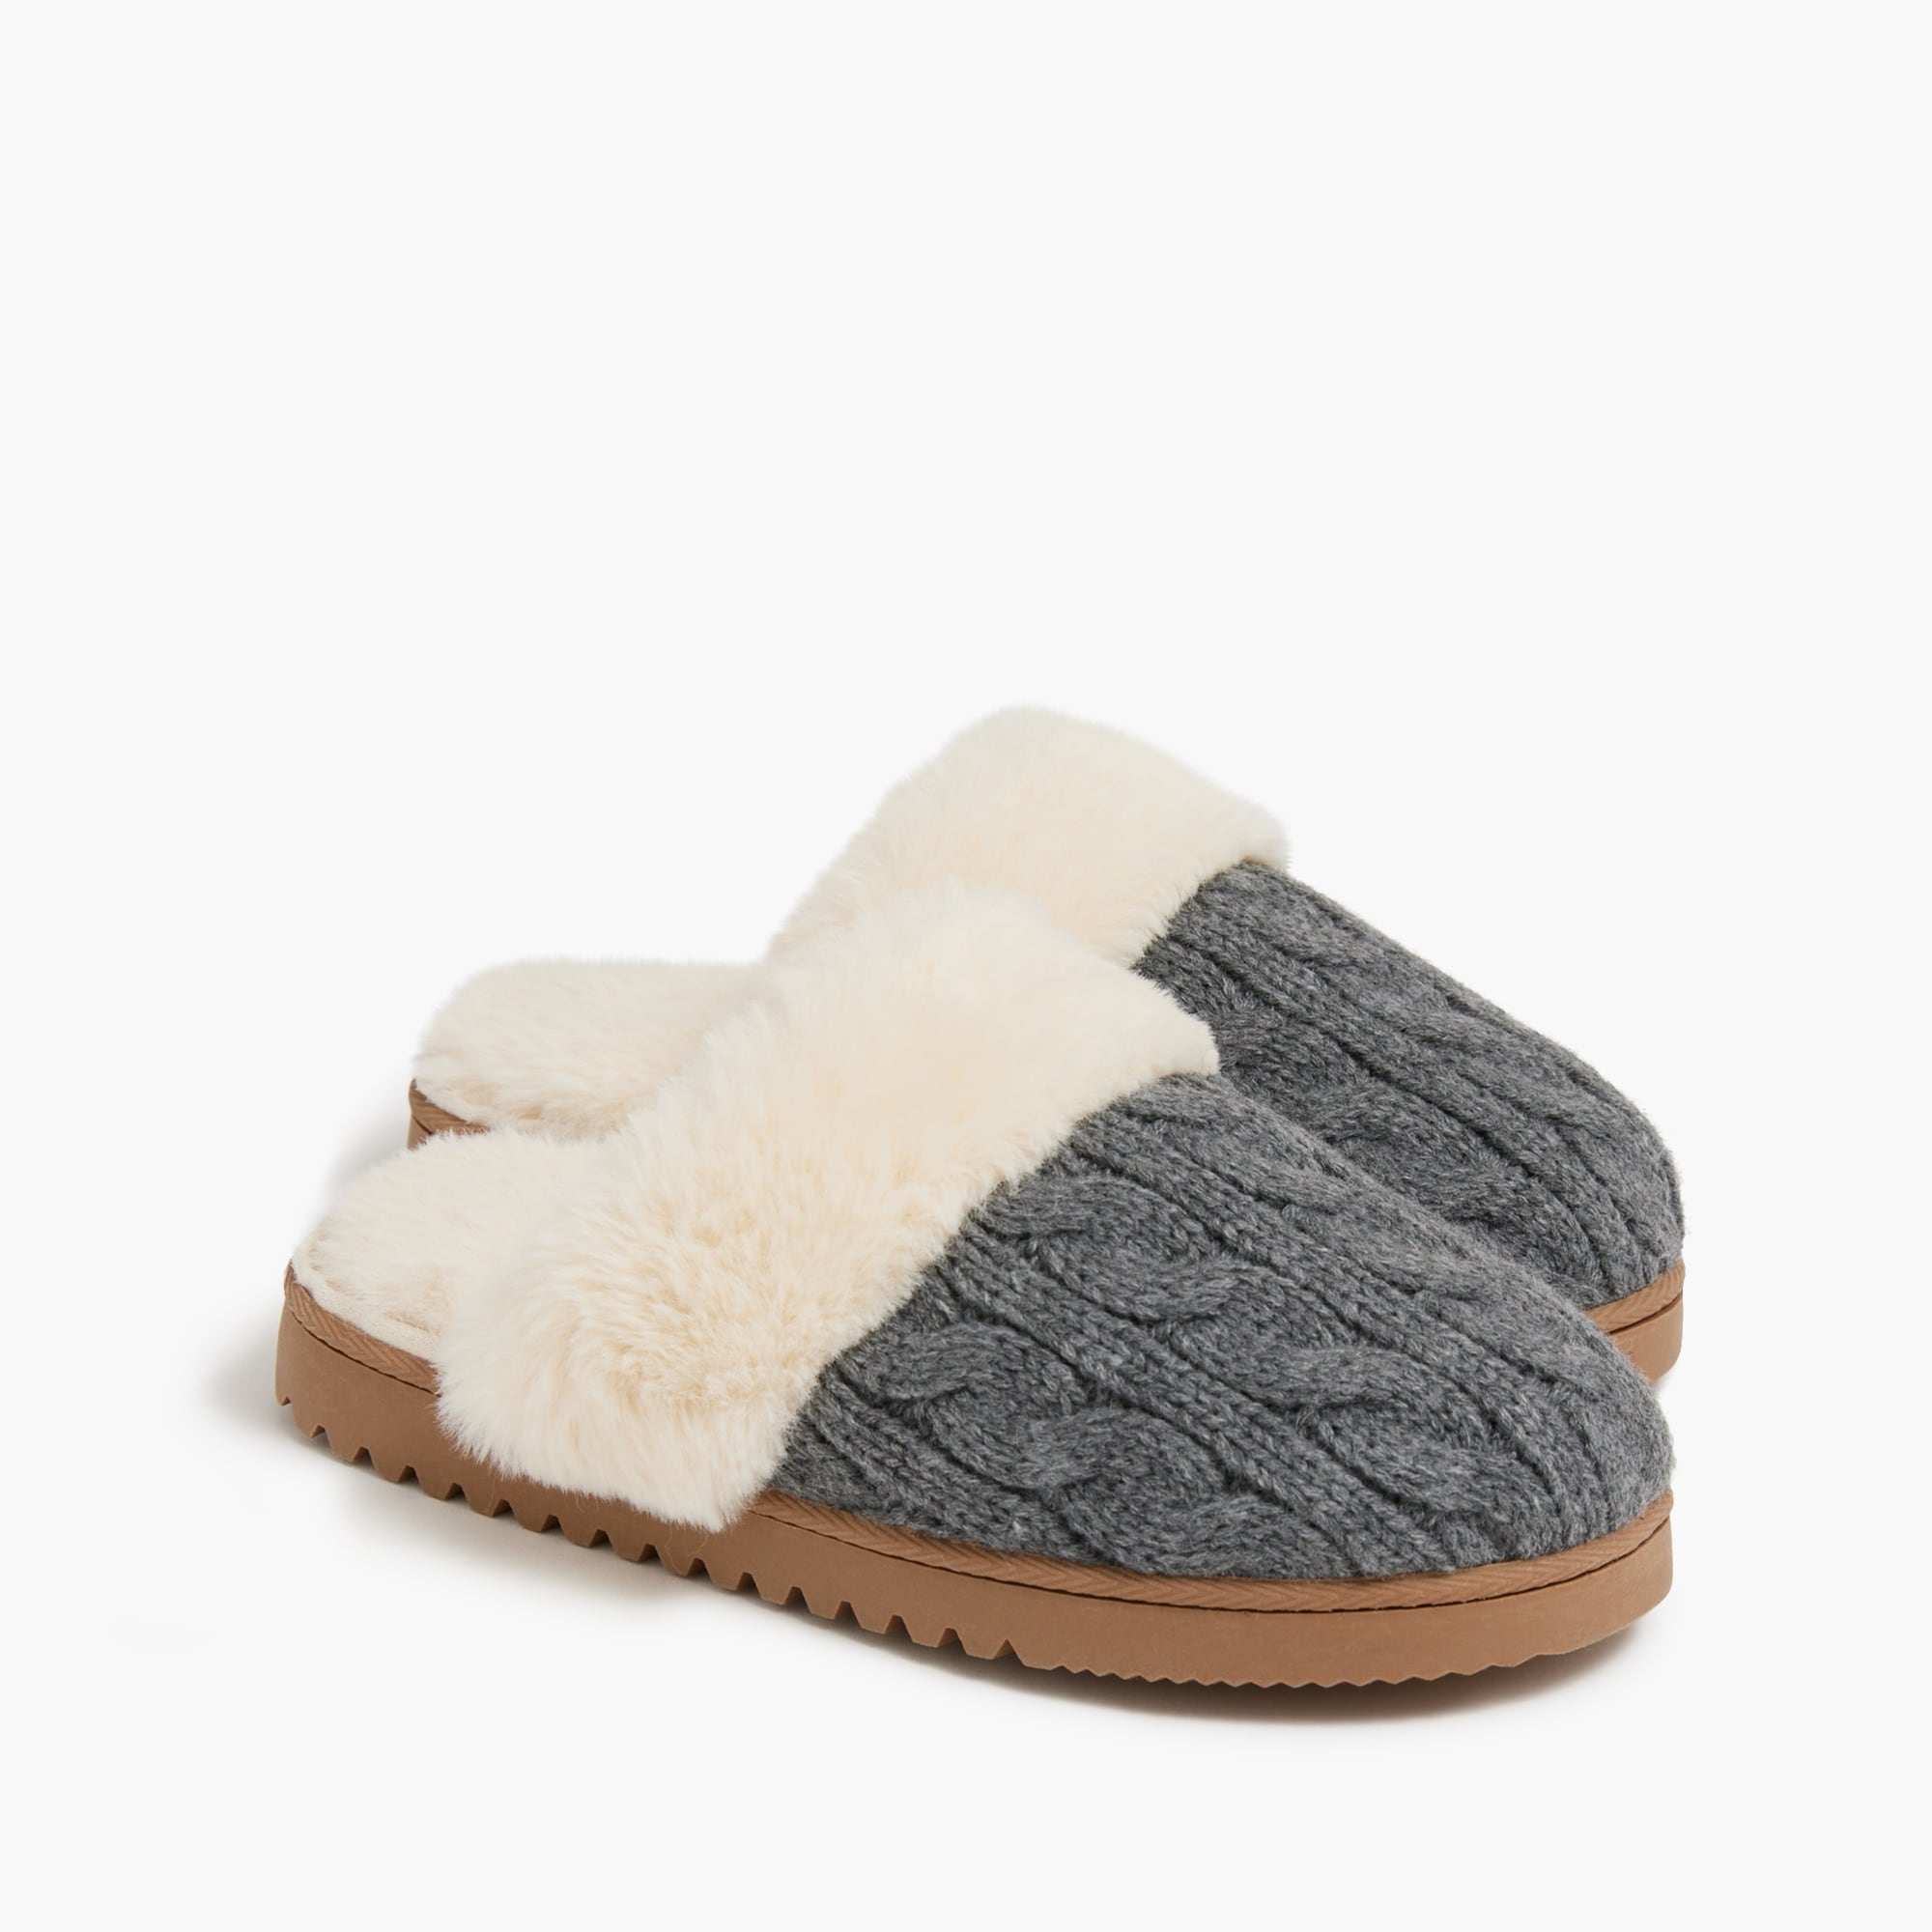 Jcrew Cable-knit scuff slippers